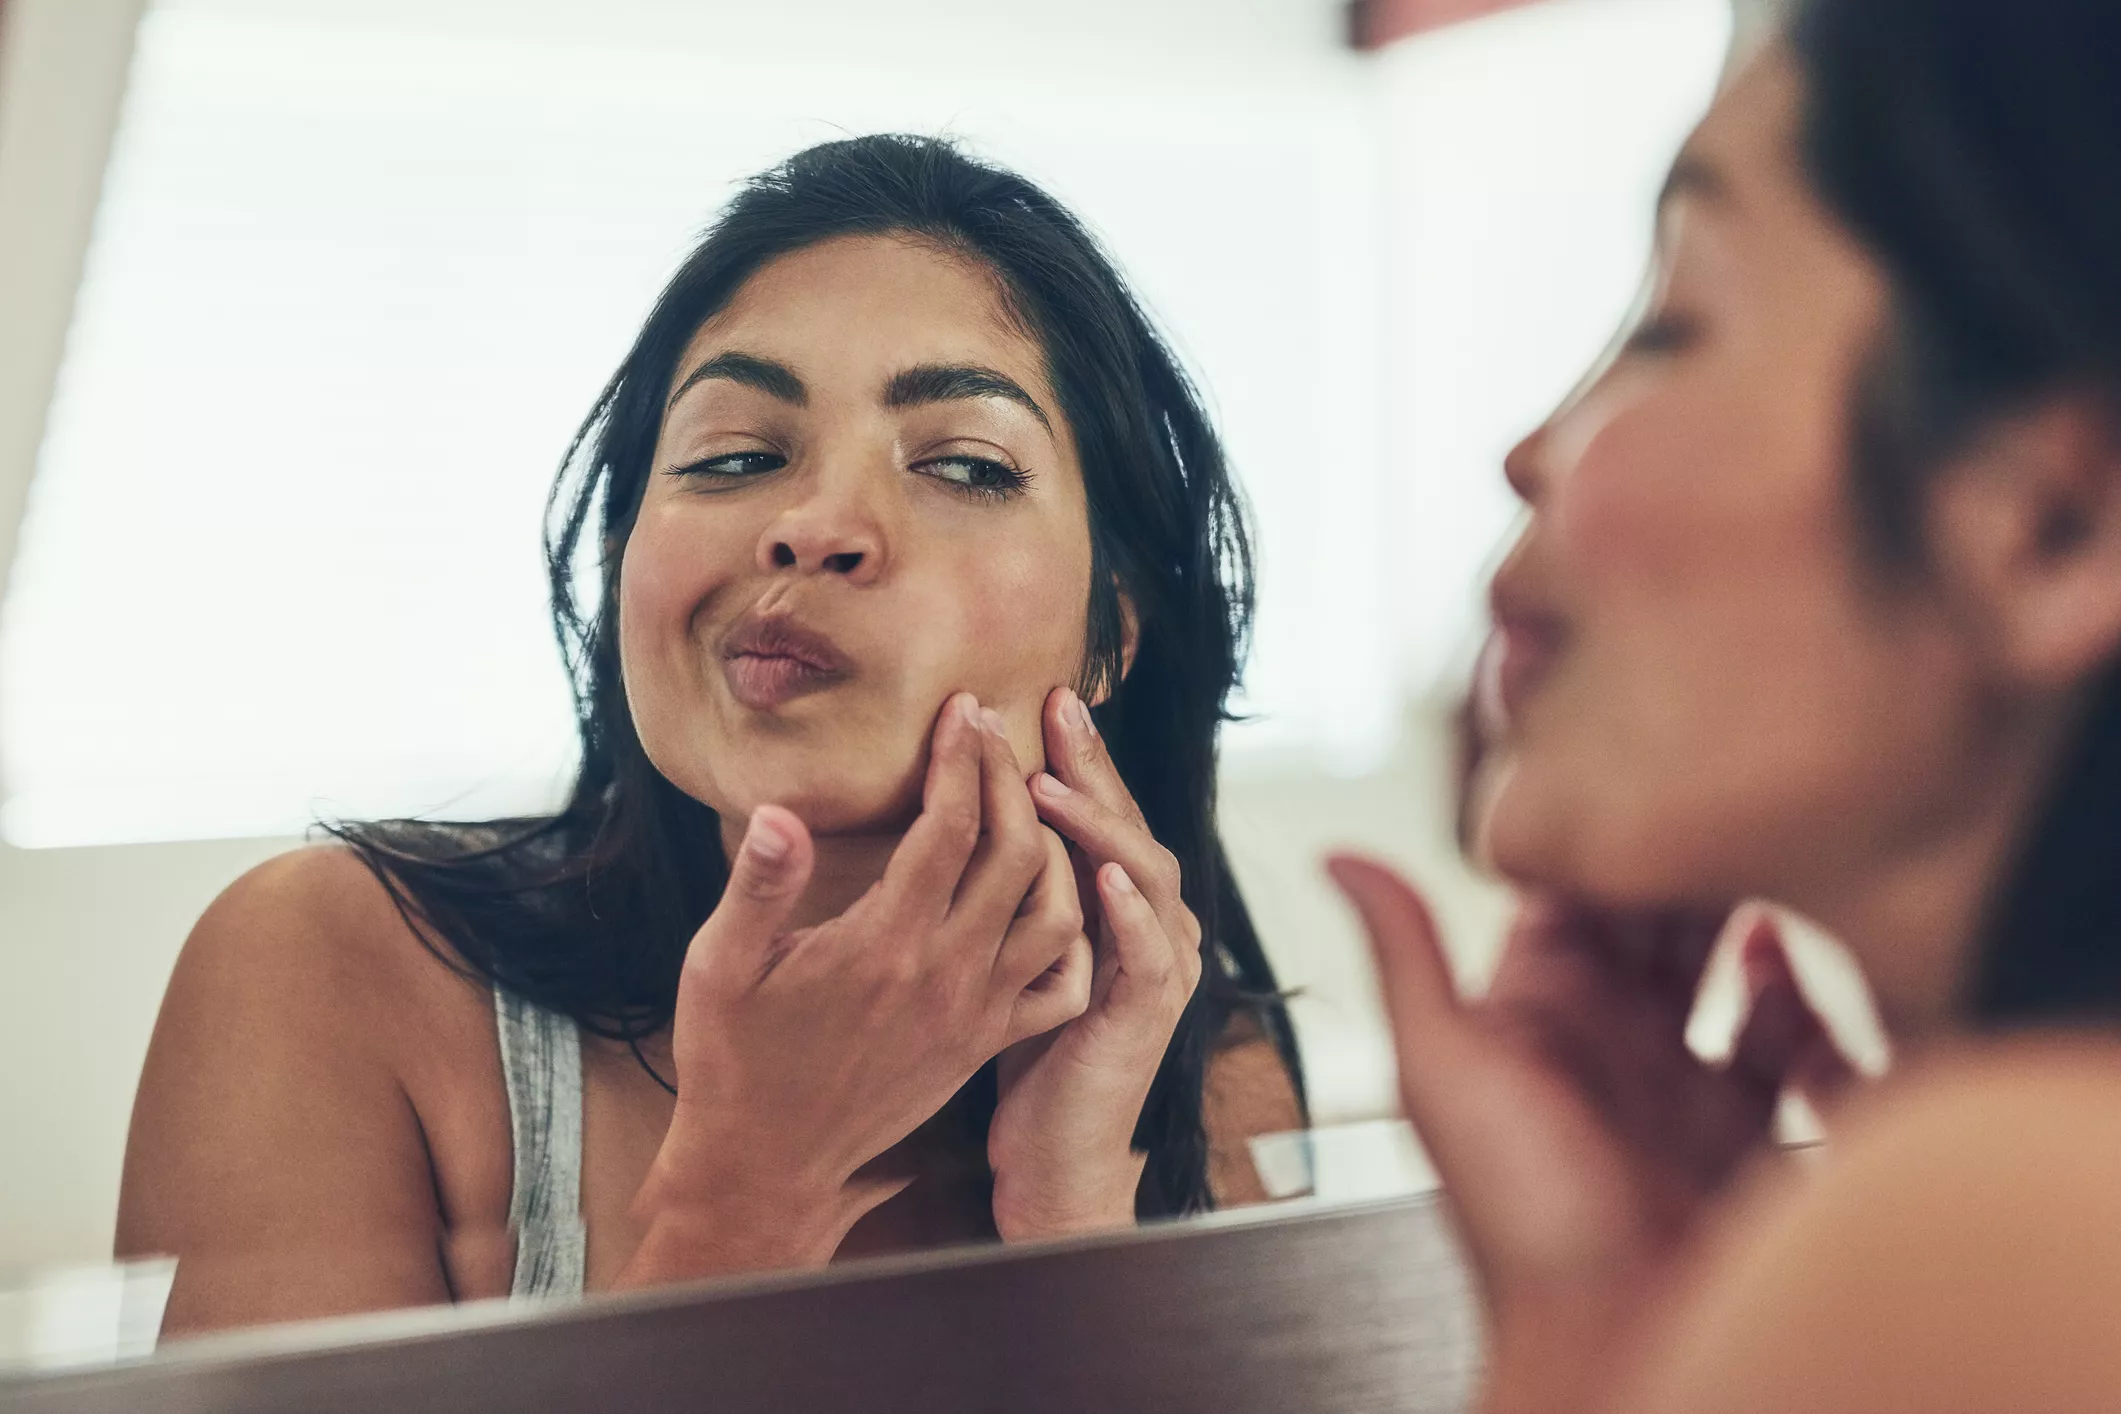 Woman popping pimple in mirror.